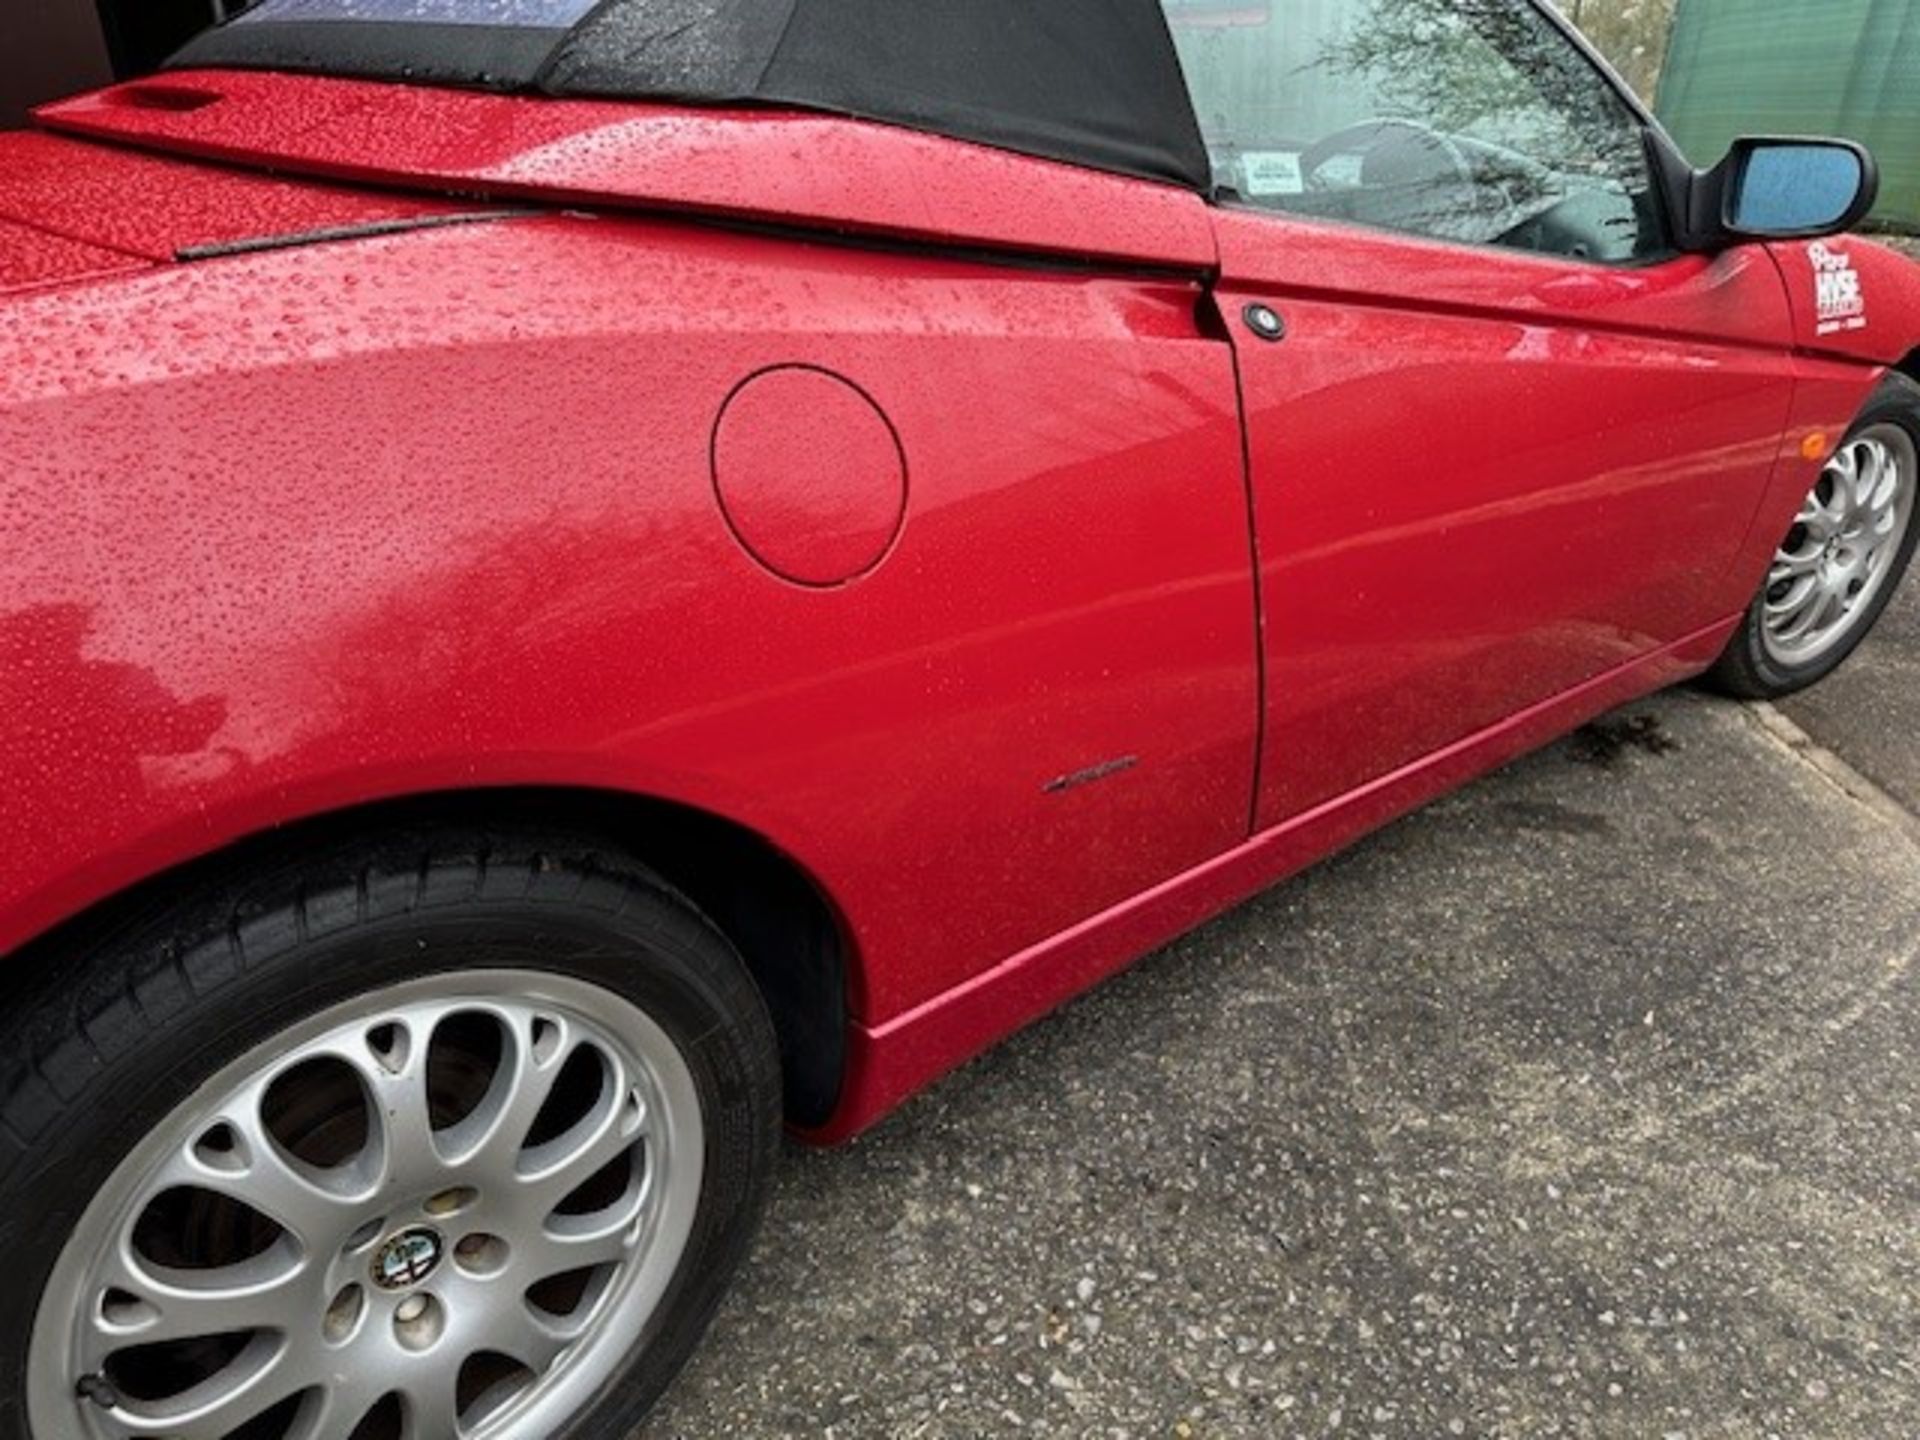 2000 Alfa Romeo Spider Lusso TS Spider Registration number W637 TGS Red with a black interior MOT - Image 9 of 14